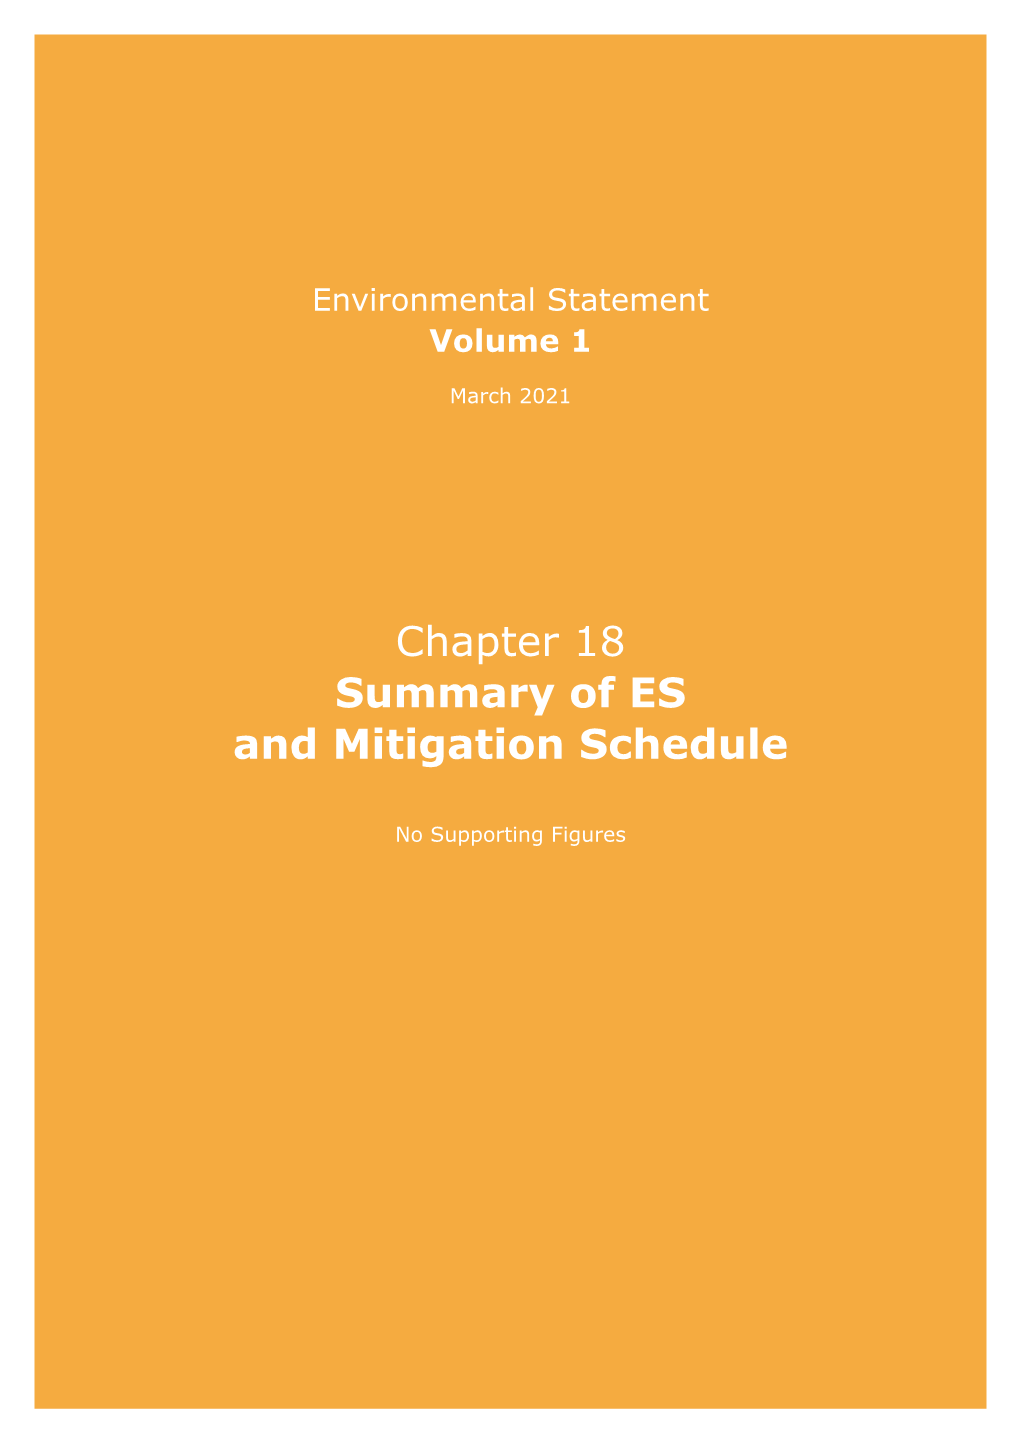 Chapter 18 Summary of ES and Mitigation Schedule